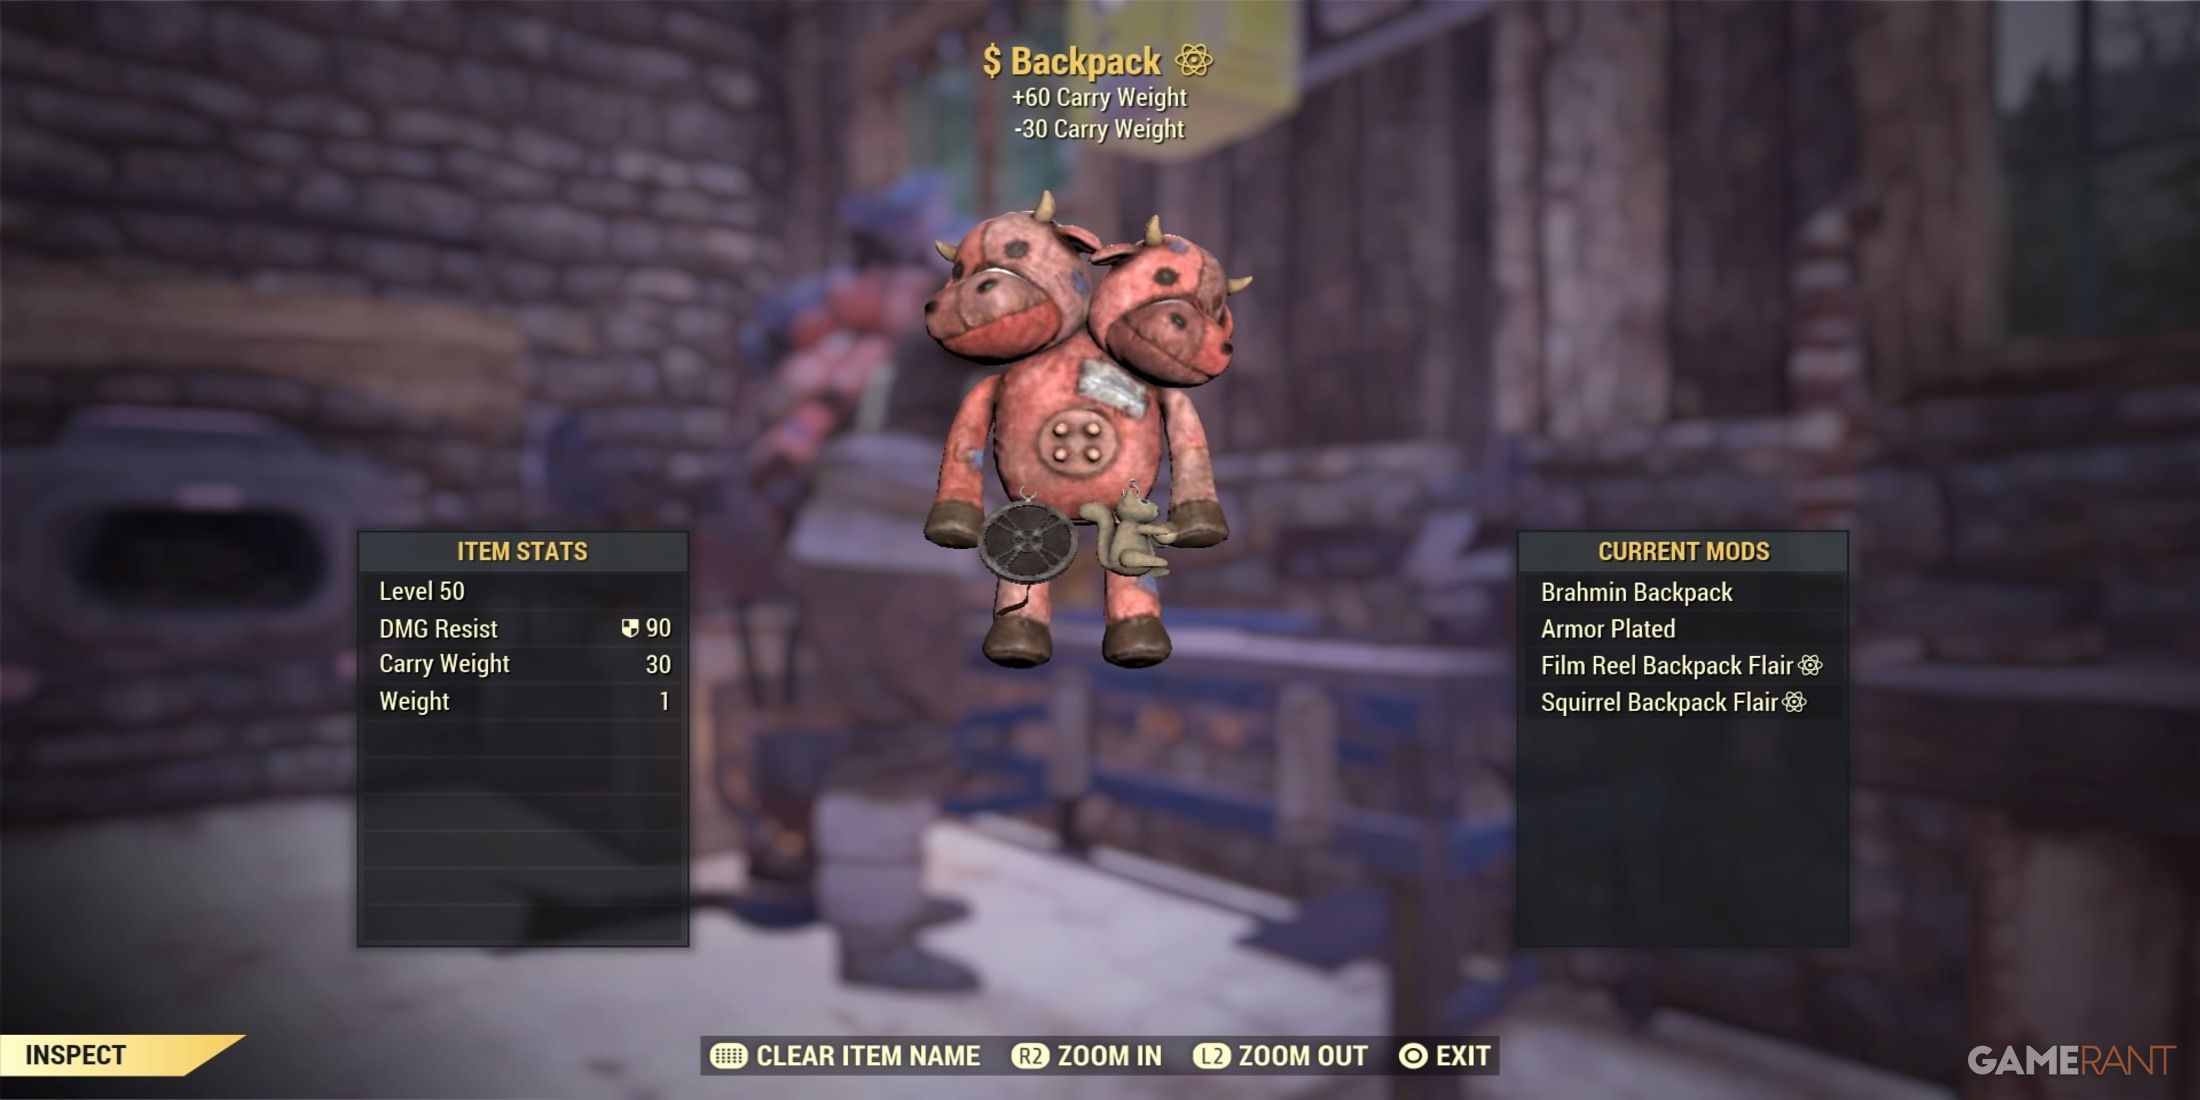 Armor Plated Backpack Mod in Fallout 76